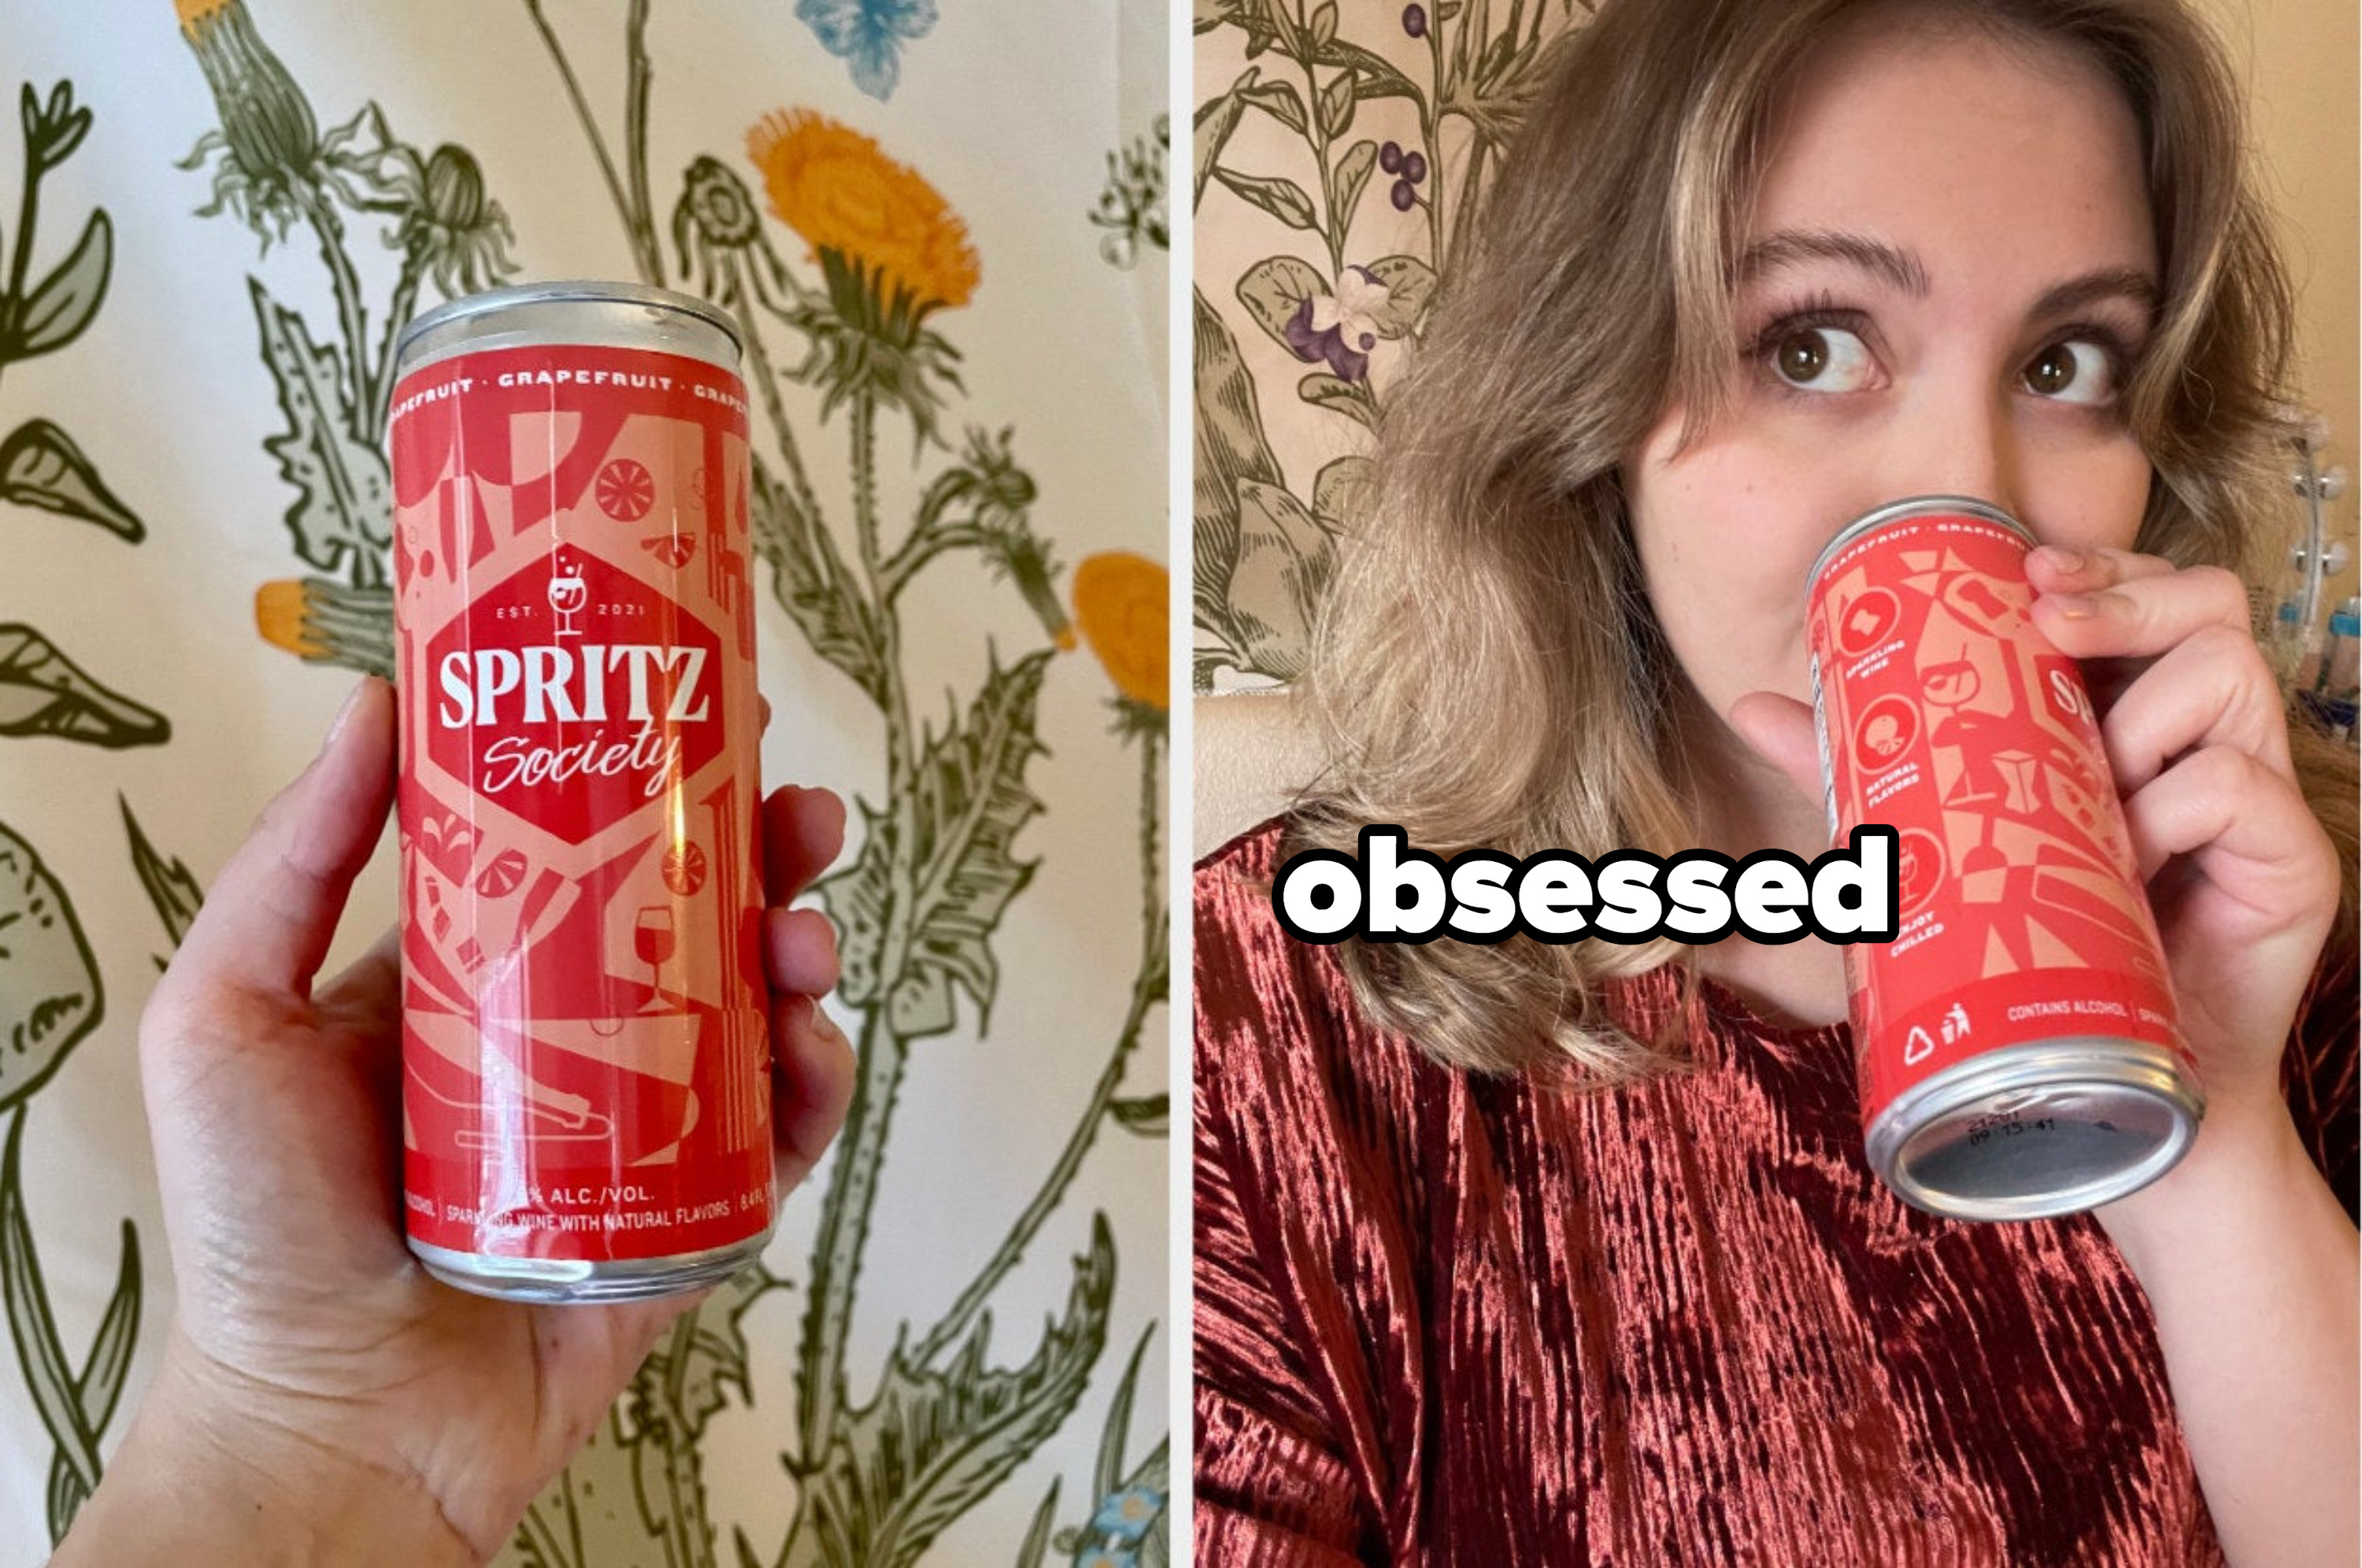 canned cocktail next to a woman sipping it